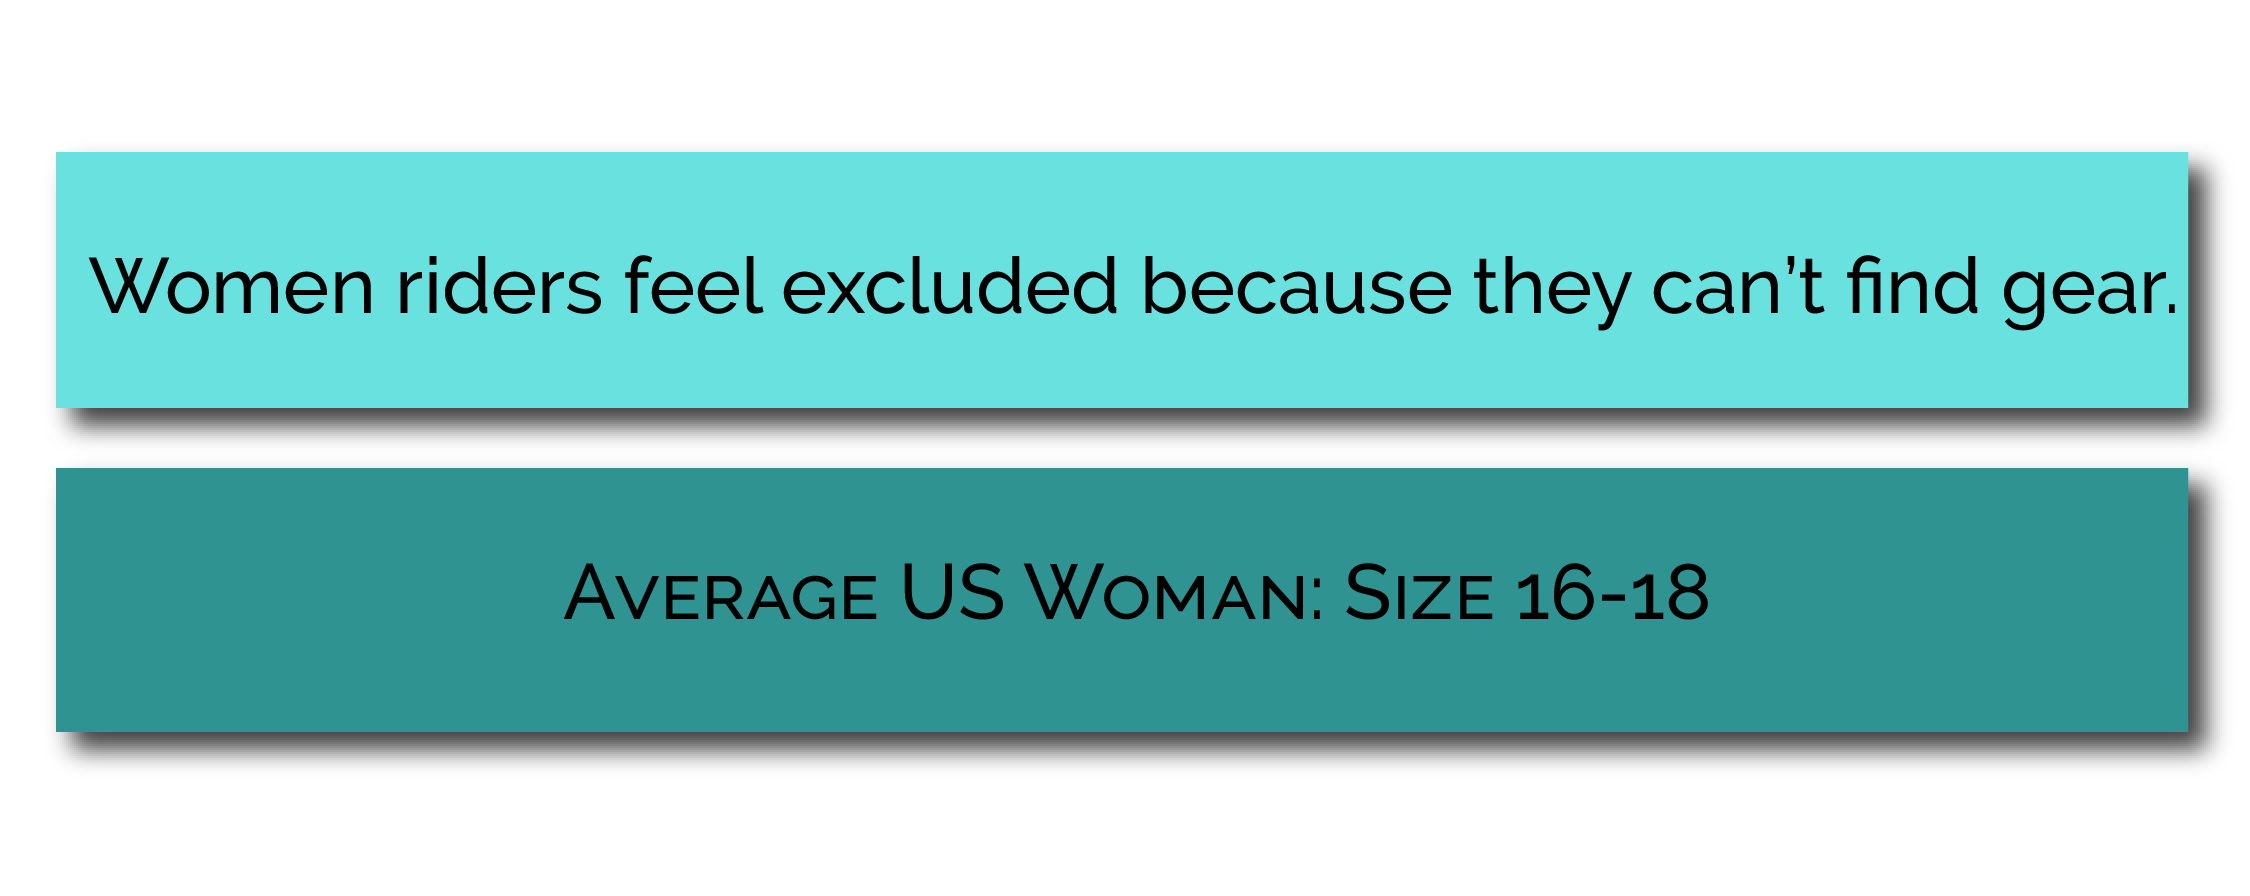 Women riders feel excluded because they can't find gear that fits. The average US woman is size 16-18.